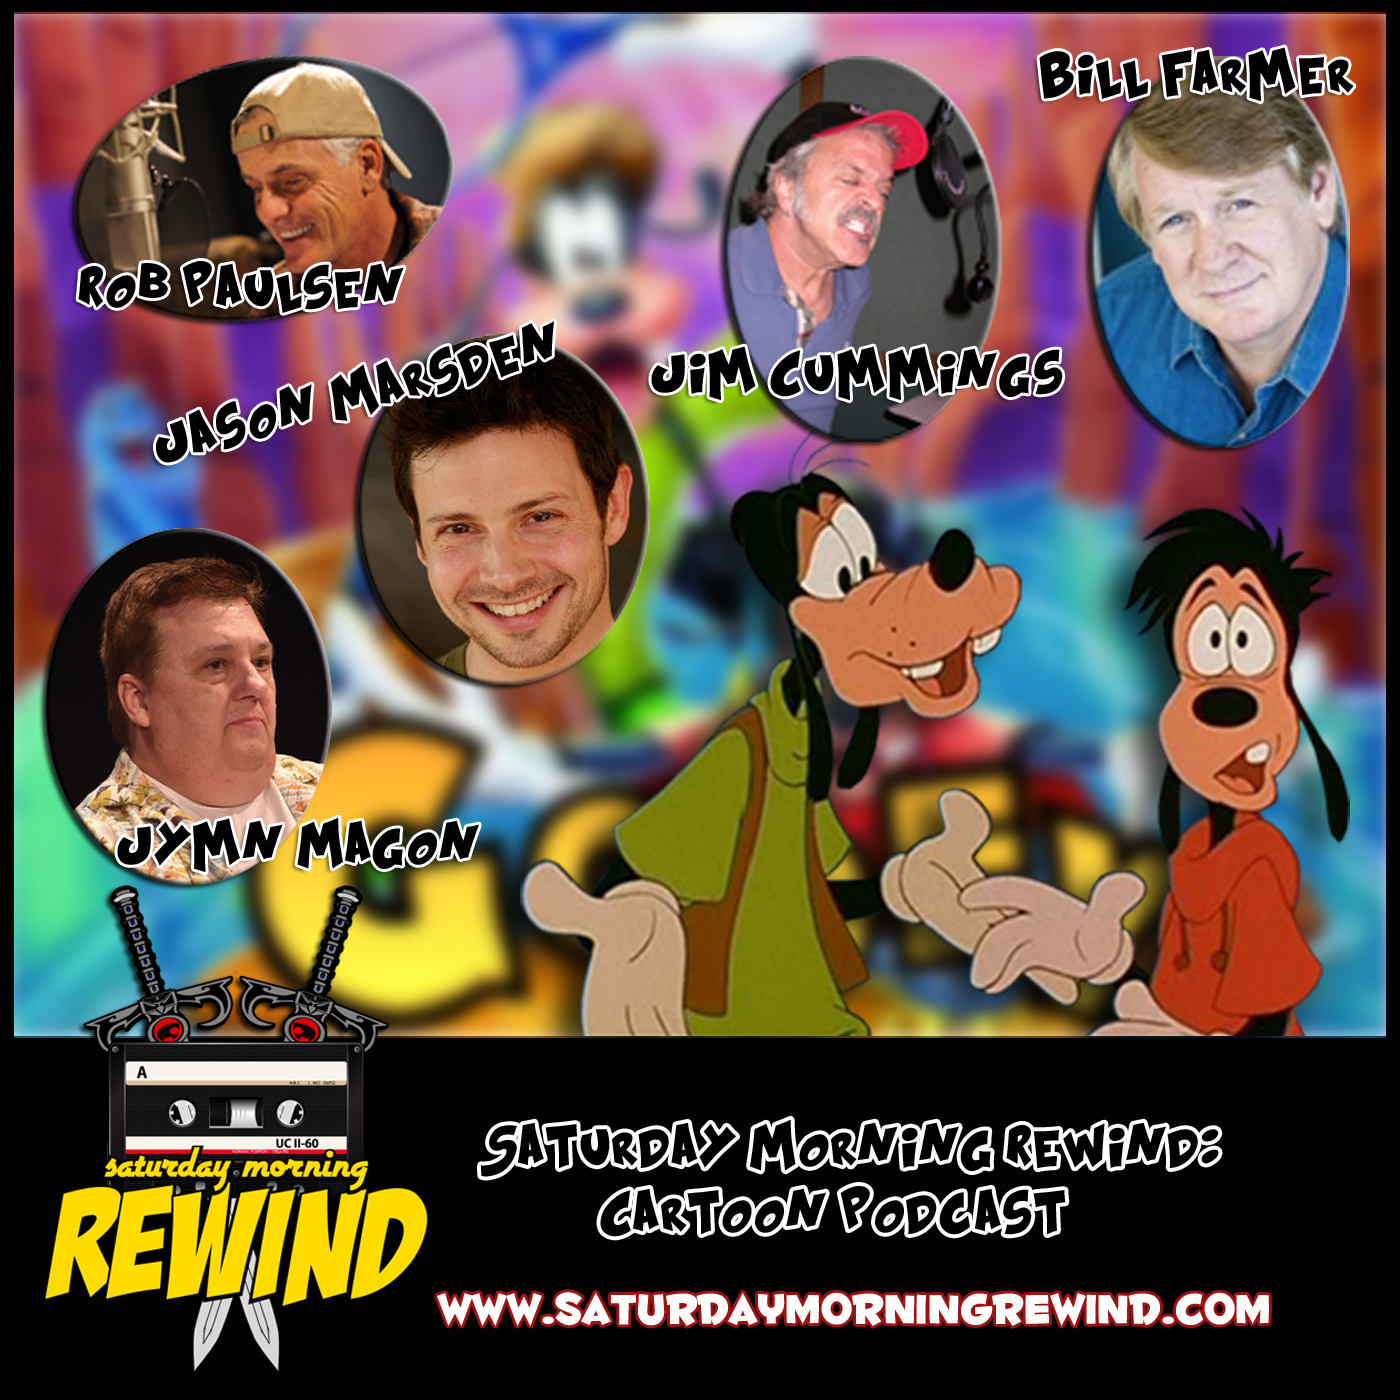 51: Jymn Magon interview and full audio from Disney's D23 2015 Expo panel of A Goofy Movie 20 year reunion!